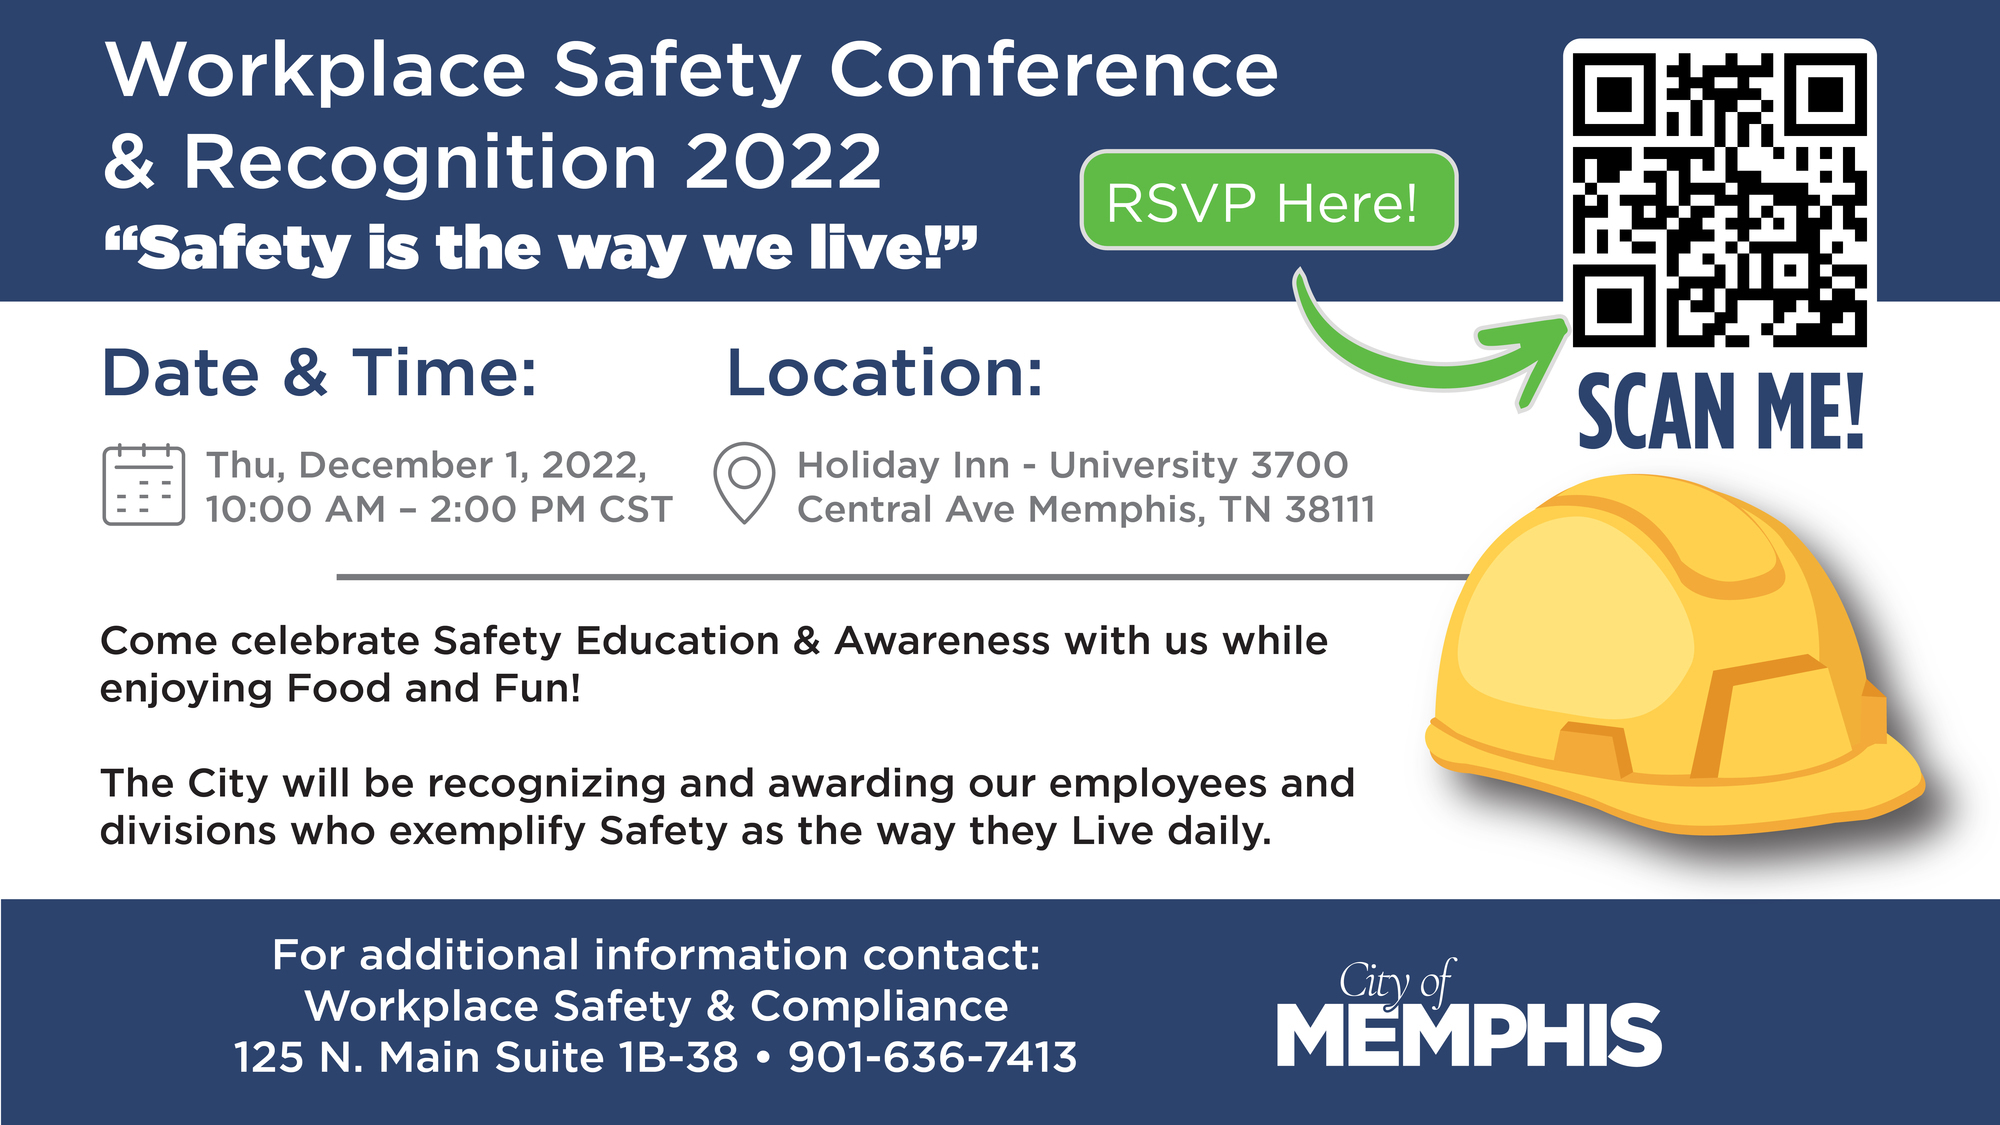 Reminder Thurs. Dec 1 Workplace Safety Conference & Recognition 2022